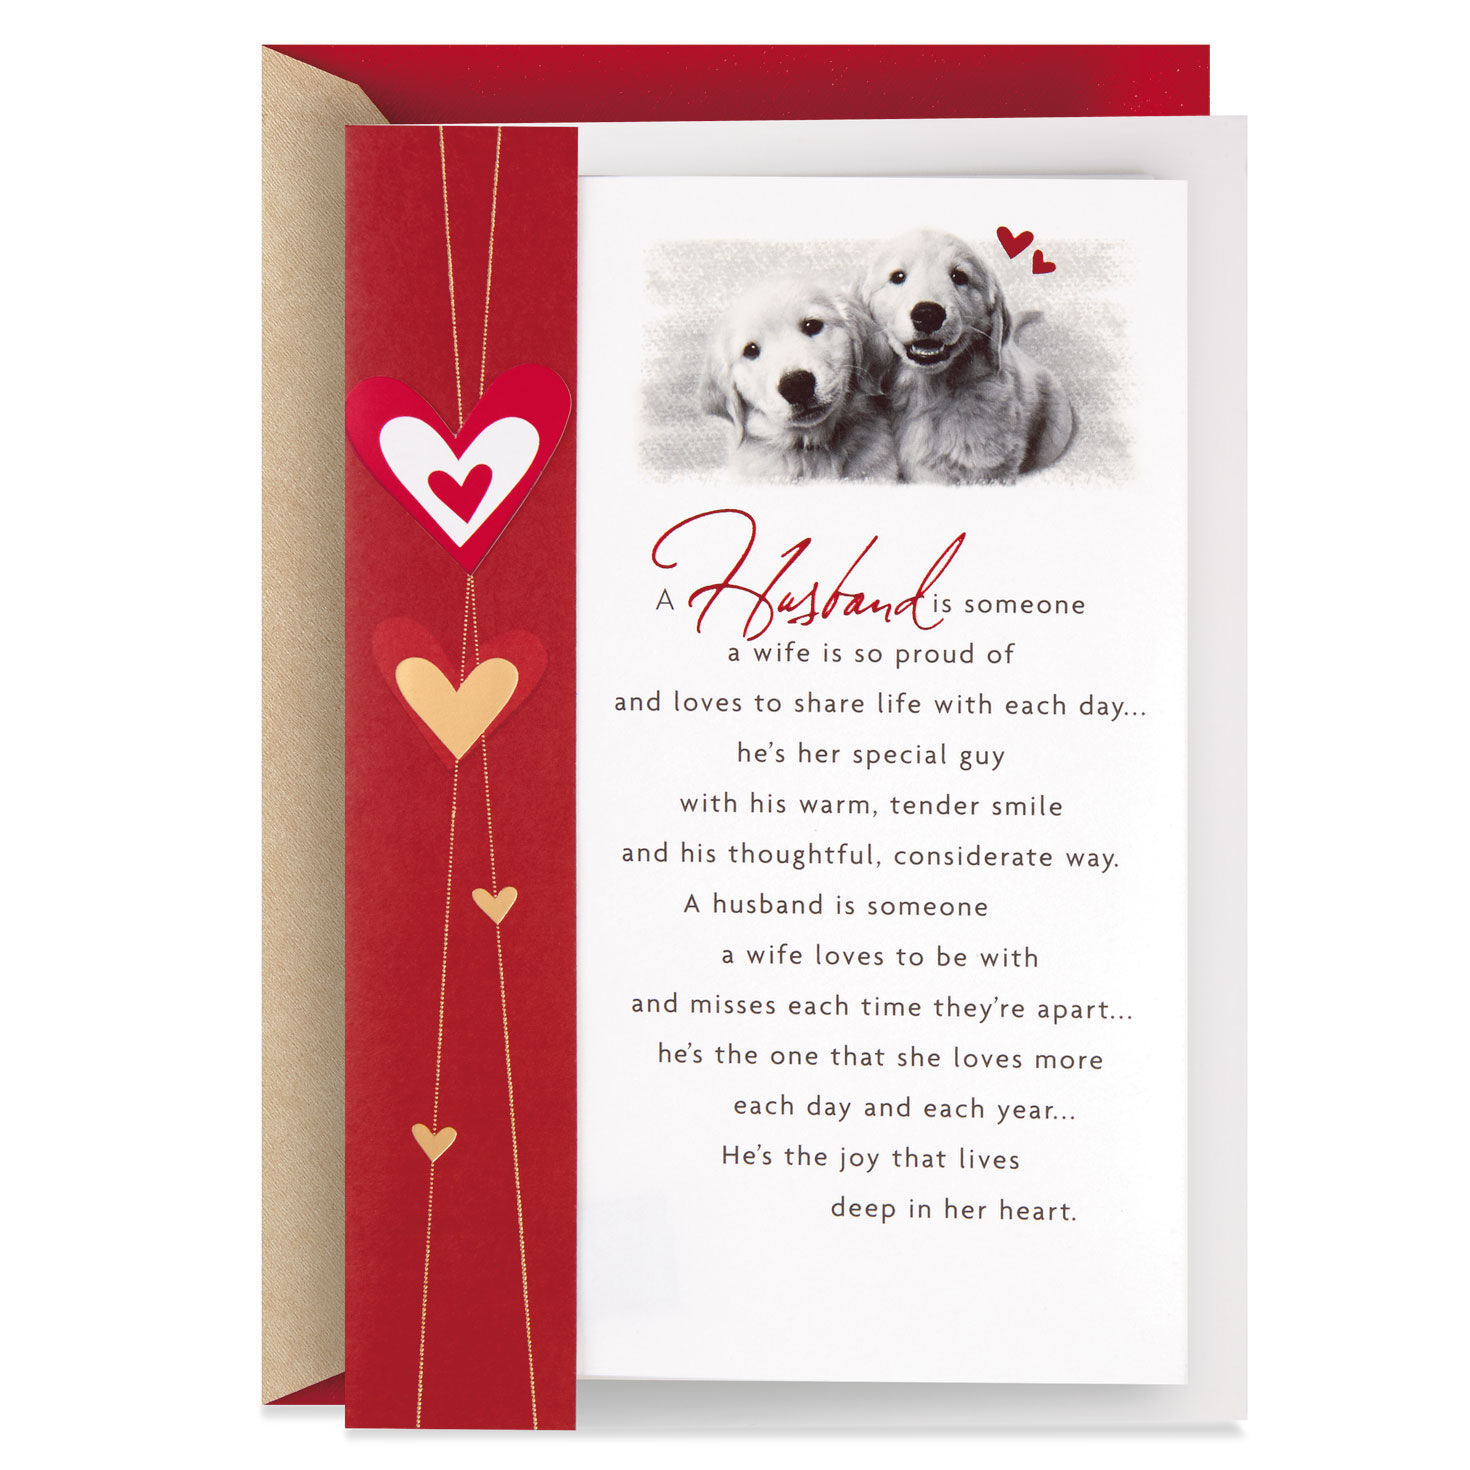 New For Lover wife husband Details about   Hallmark Valentine's Day Card with envelope 